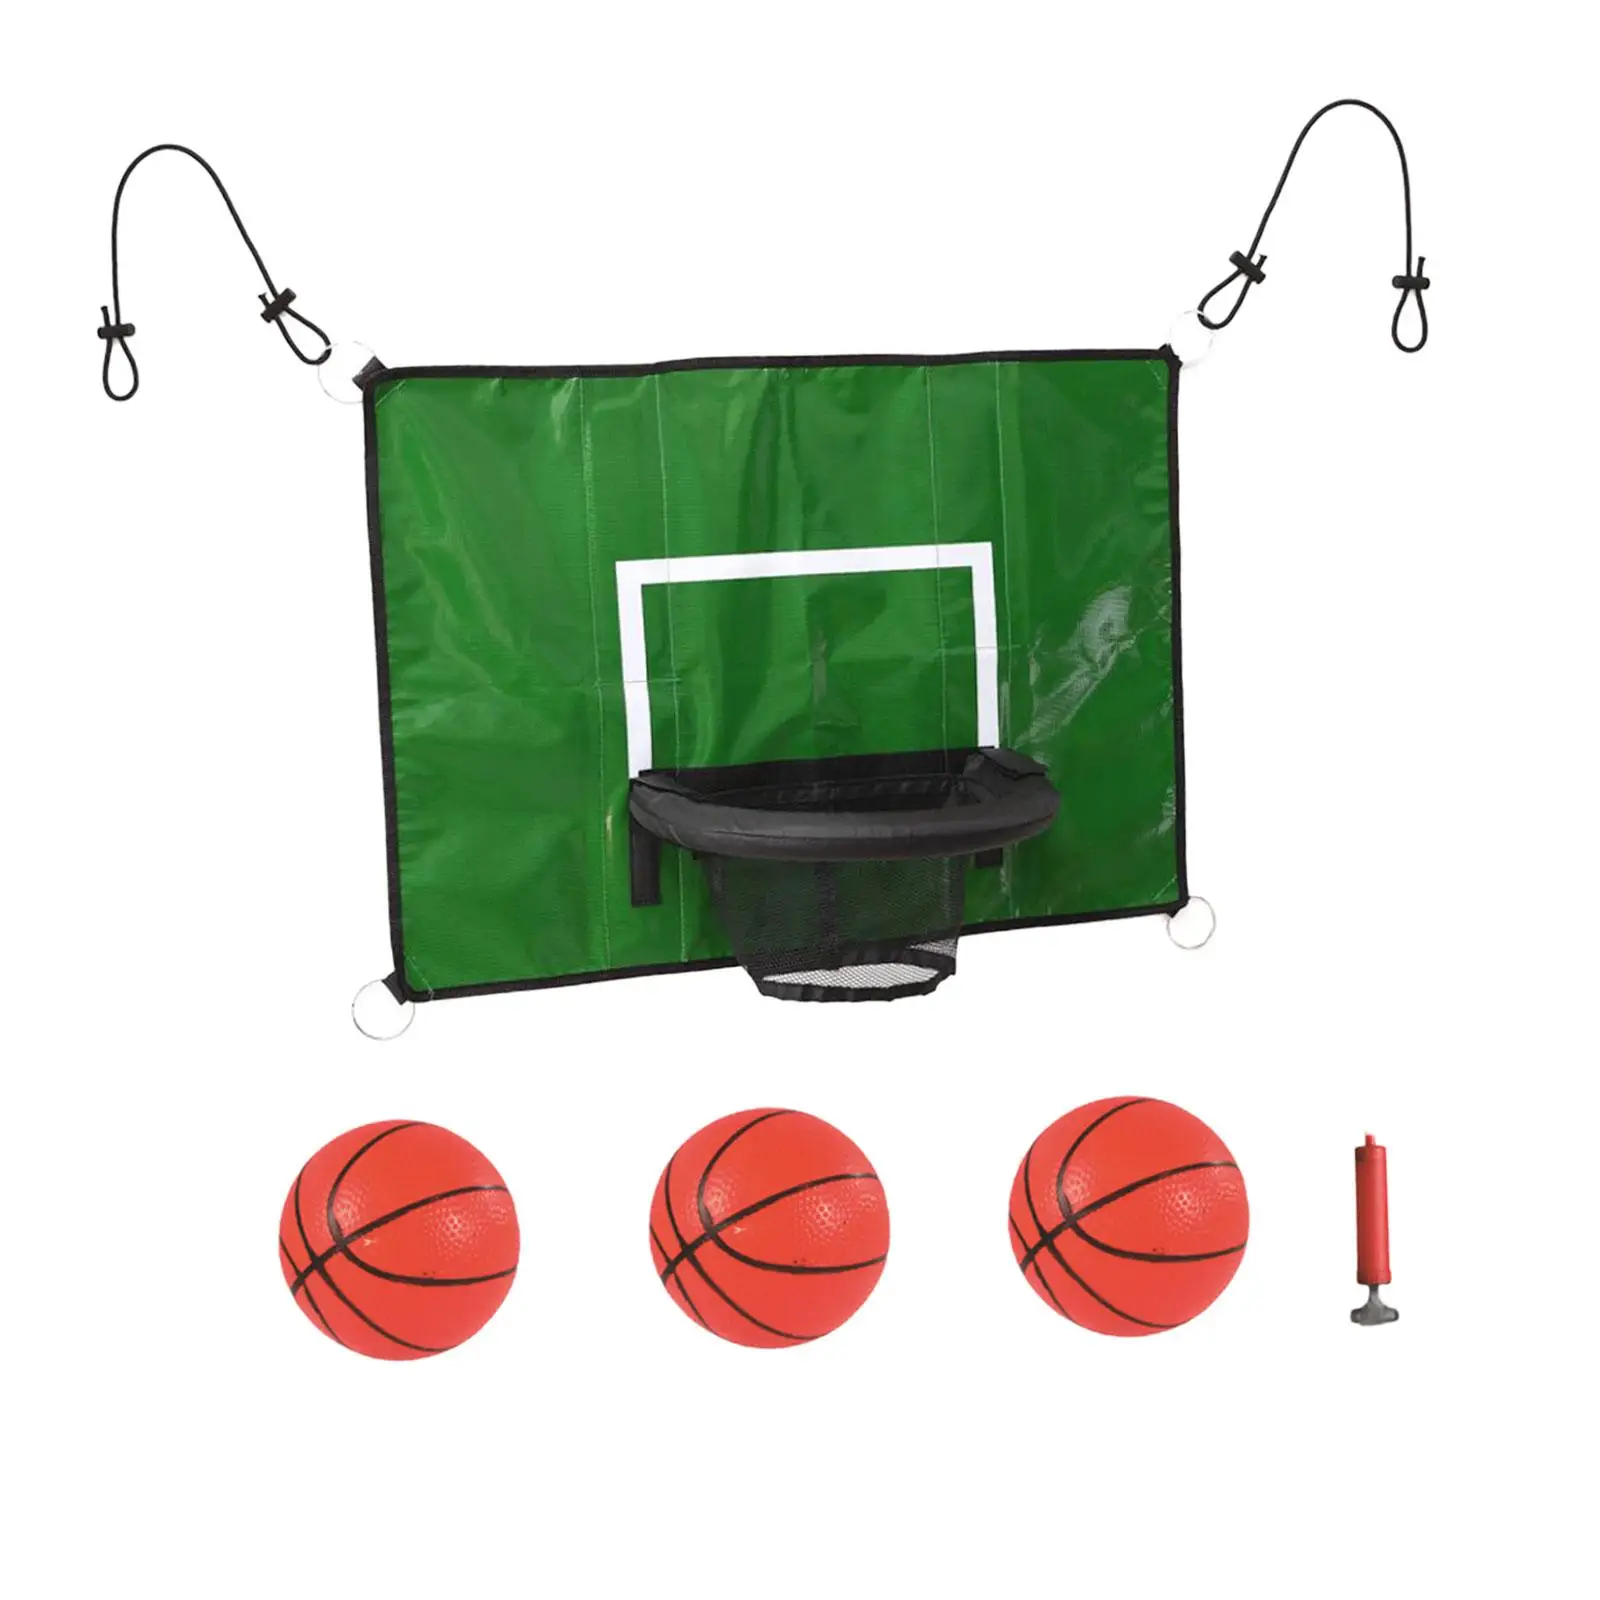 Trampoline Basketball Hoop Goal Kit for Backyard Game Accessory Simple Installation Universal Portable with Mini Basketballs